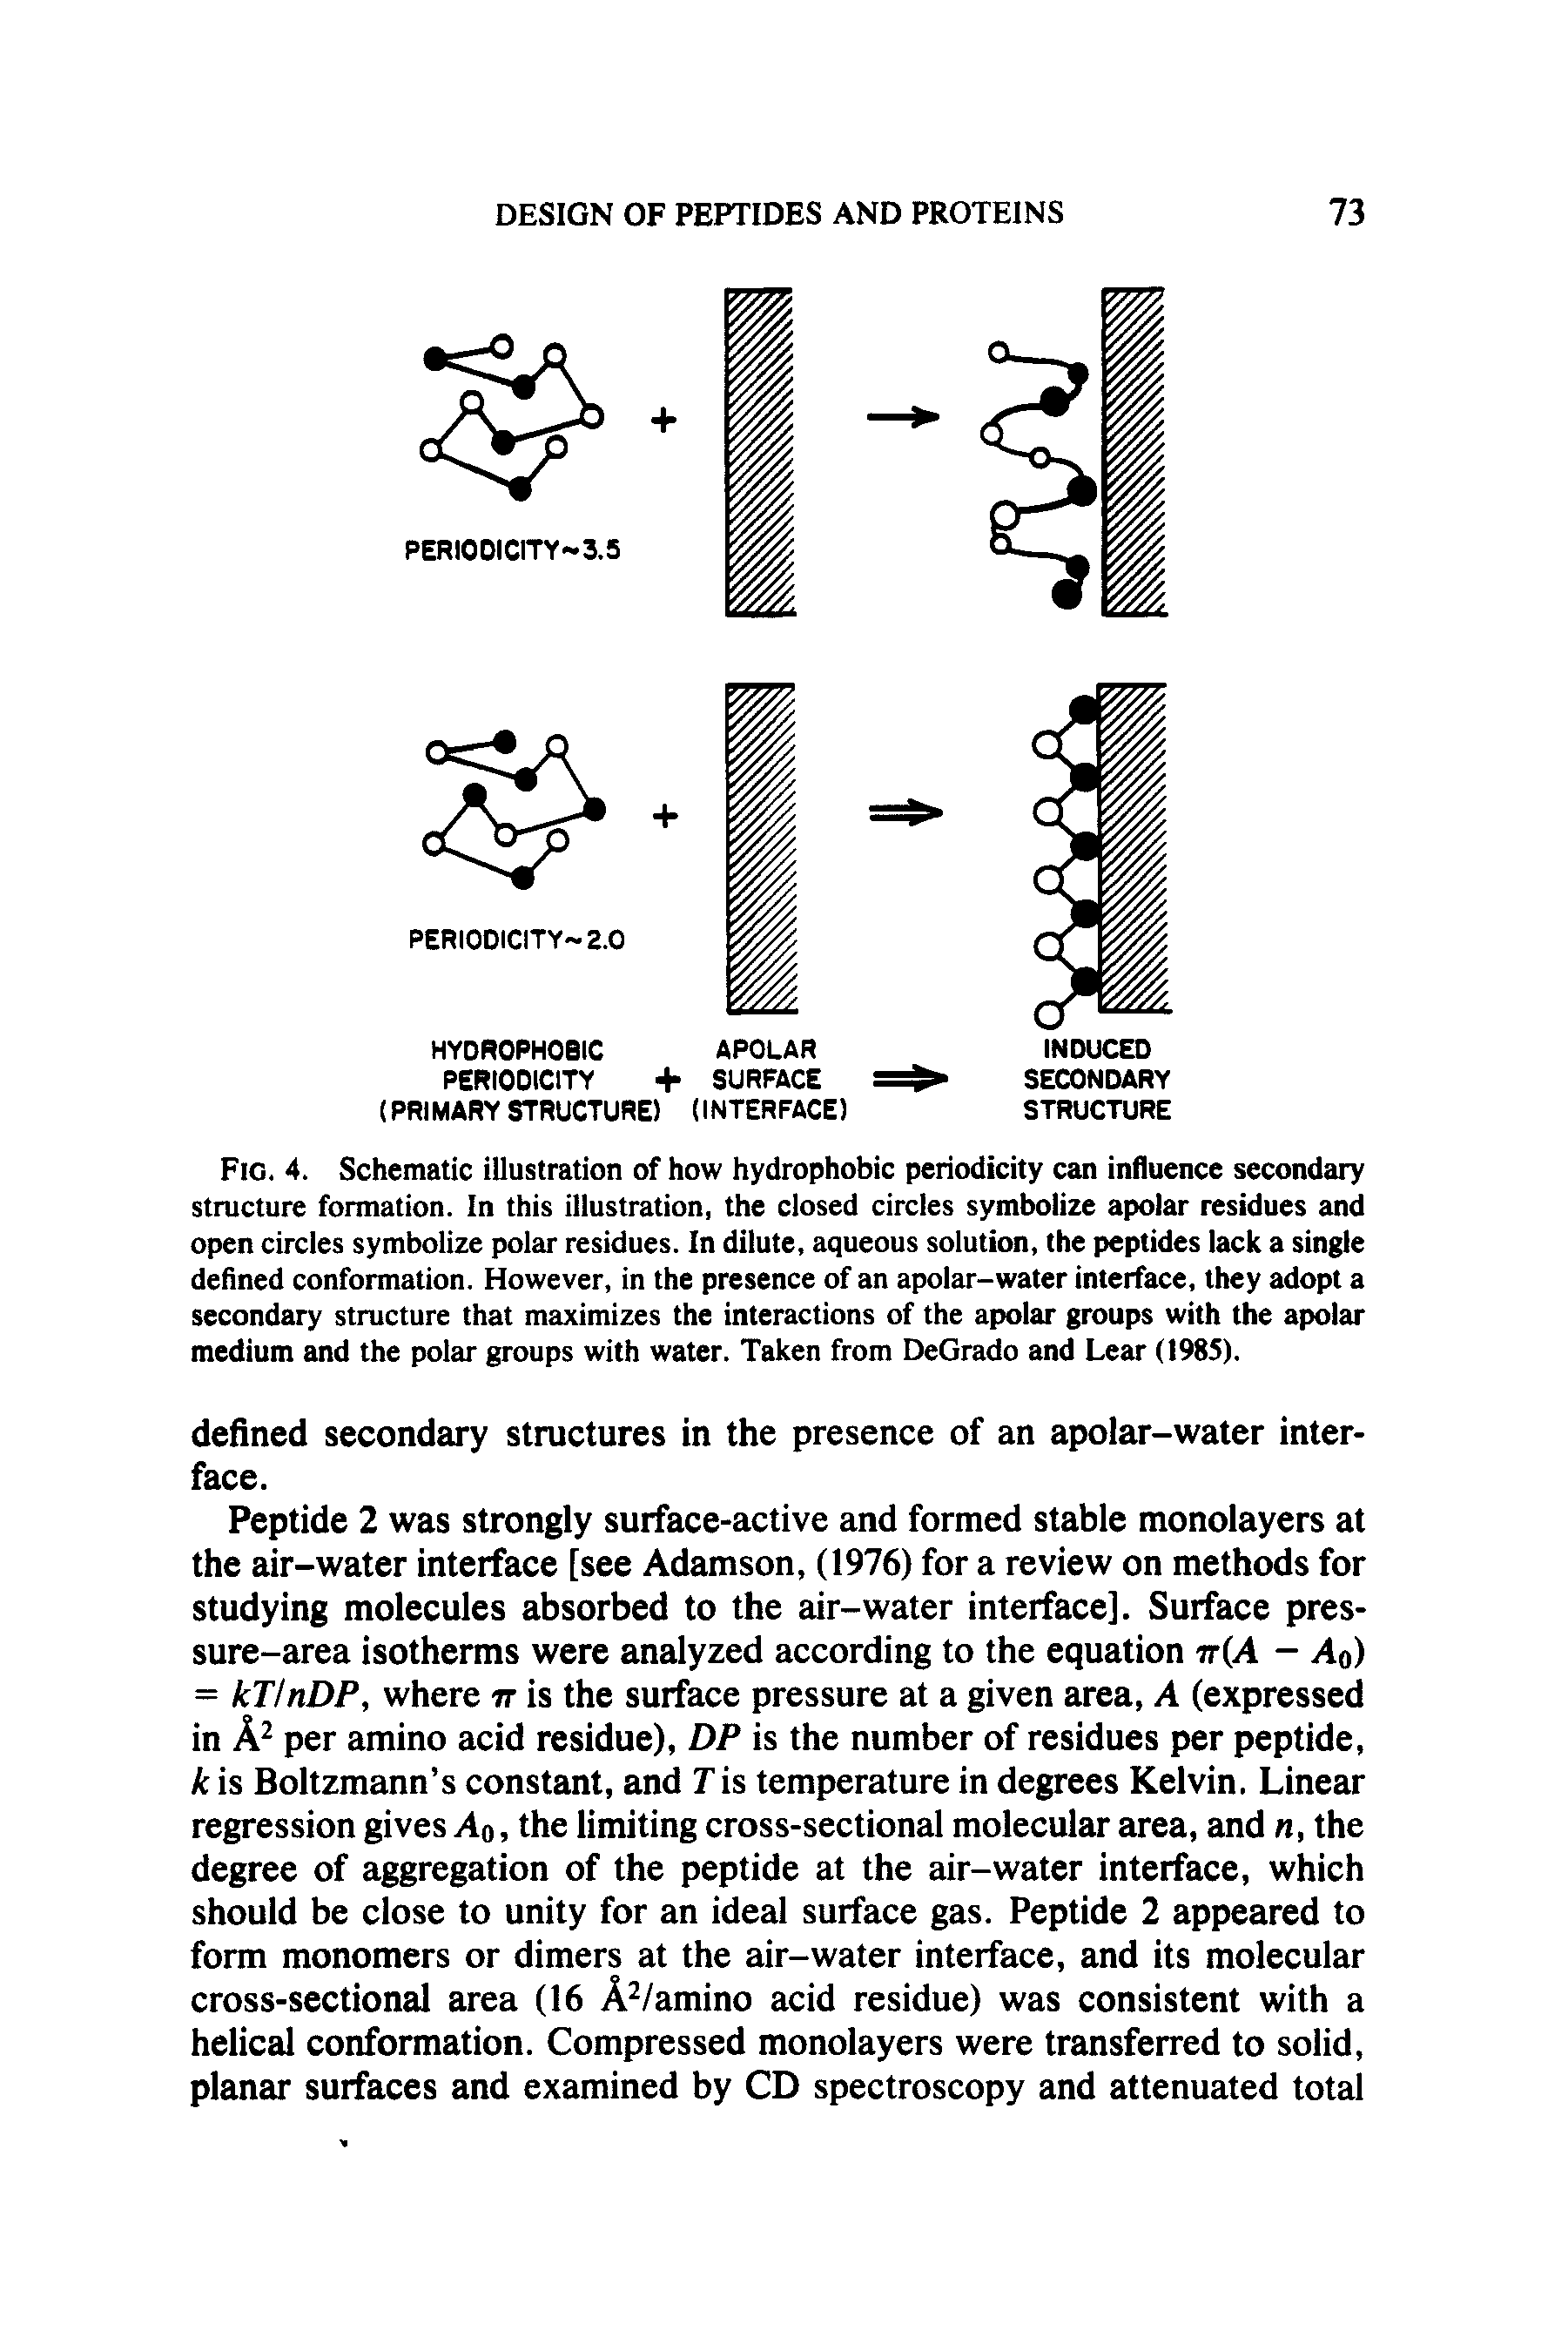 Fig. 4. Schematic illustration of how hydrophobic periodicity can influence secondary structure formation. In this illustration, the closed circles symbolize apolar residues and open circles symbolize polar residues. In dilute, aqueous solution, the peptides lack a single defined conformation. However, in the presence of an apolar-water interface, they adopt a secondary structure that maximizes the interactions of the apolar groups with the apolar medium and the polar groups with water. Taken from DeGrado and Lear (1985).